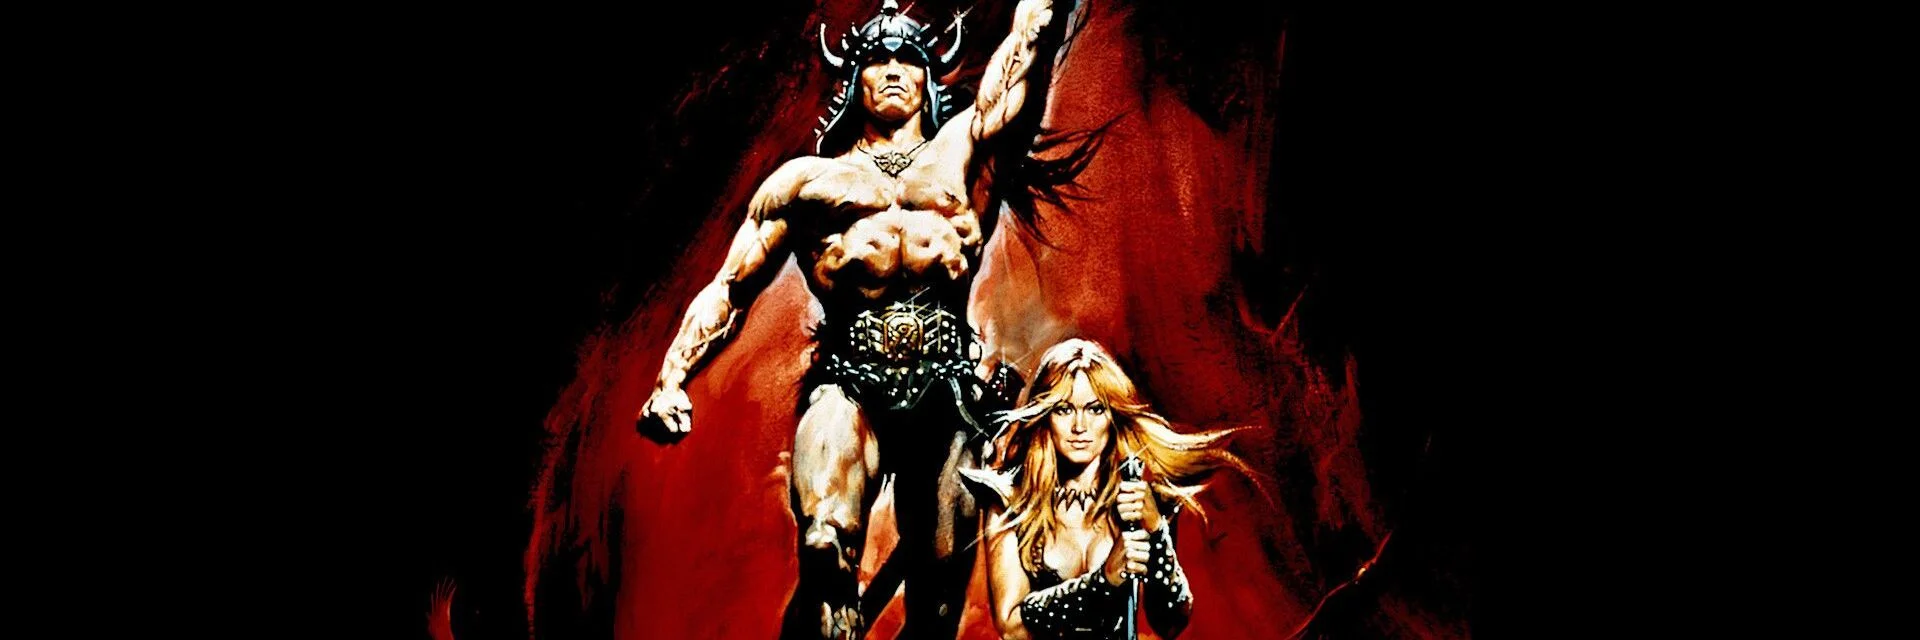 Conan the Barbarian 4K 1982 Extended Cut big poster